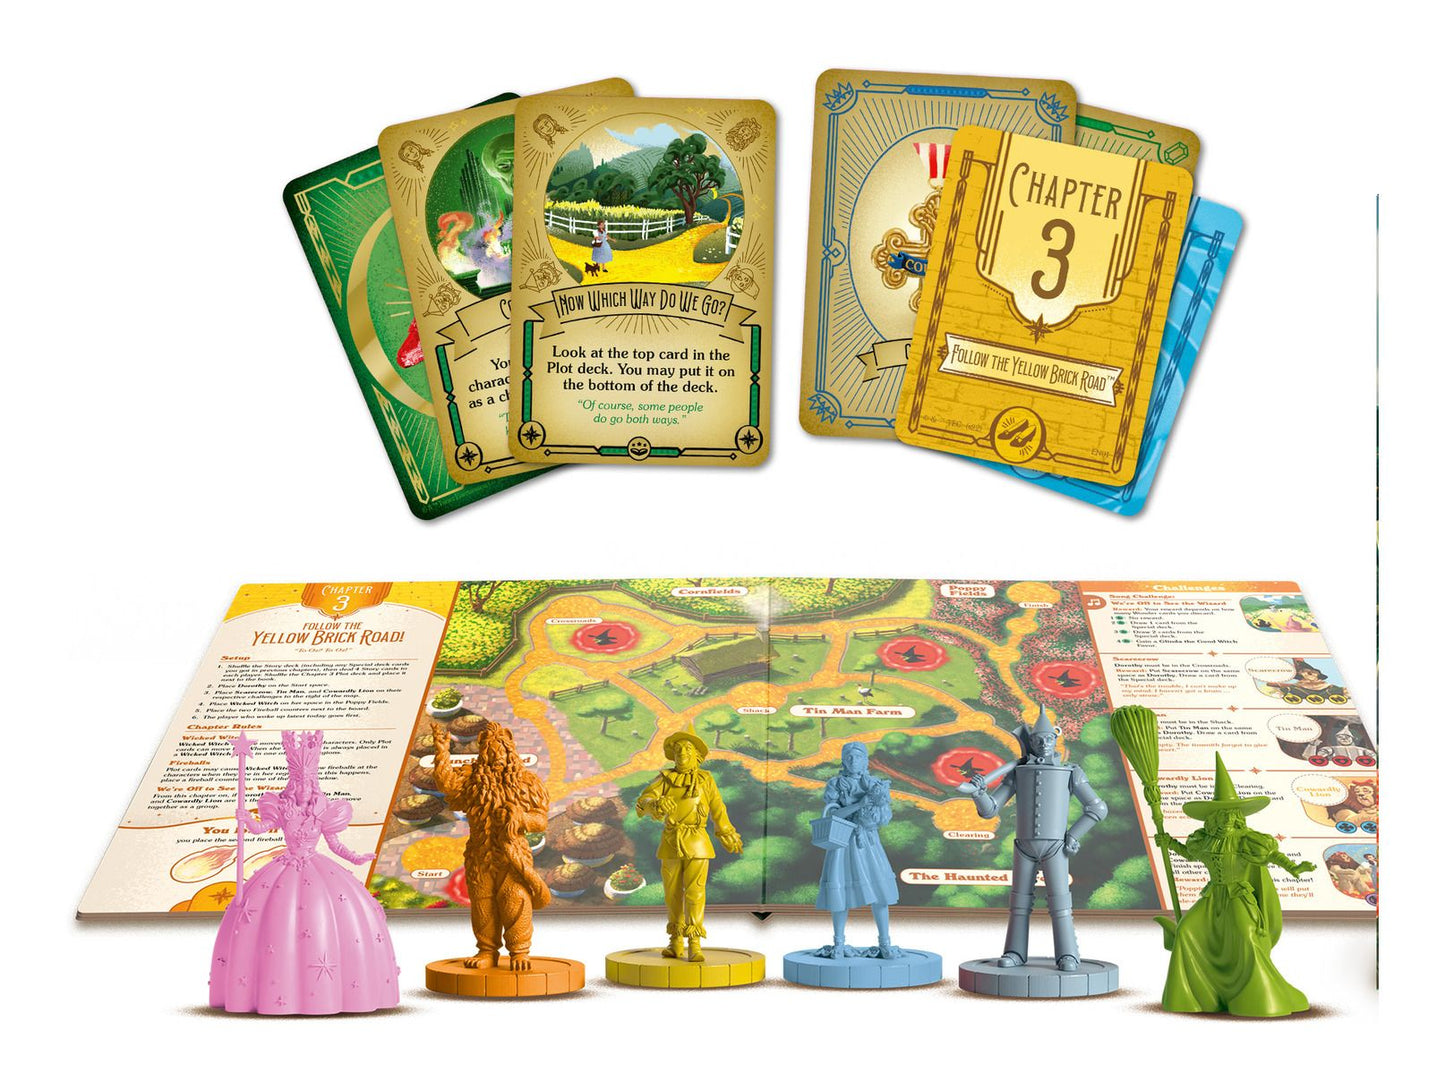 The Wizard of Oz Adventure Book Game. Ravensburger. Sold by Board Hoarders